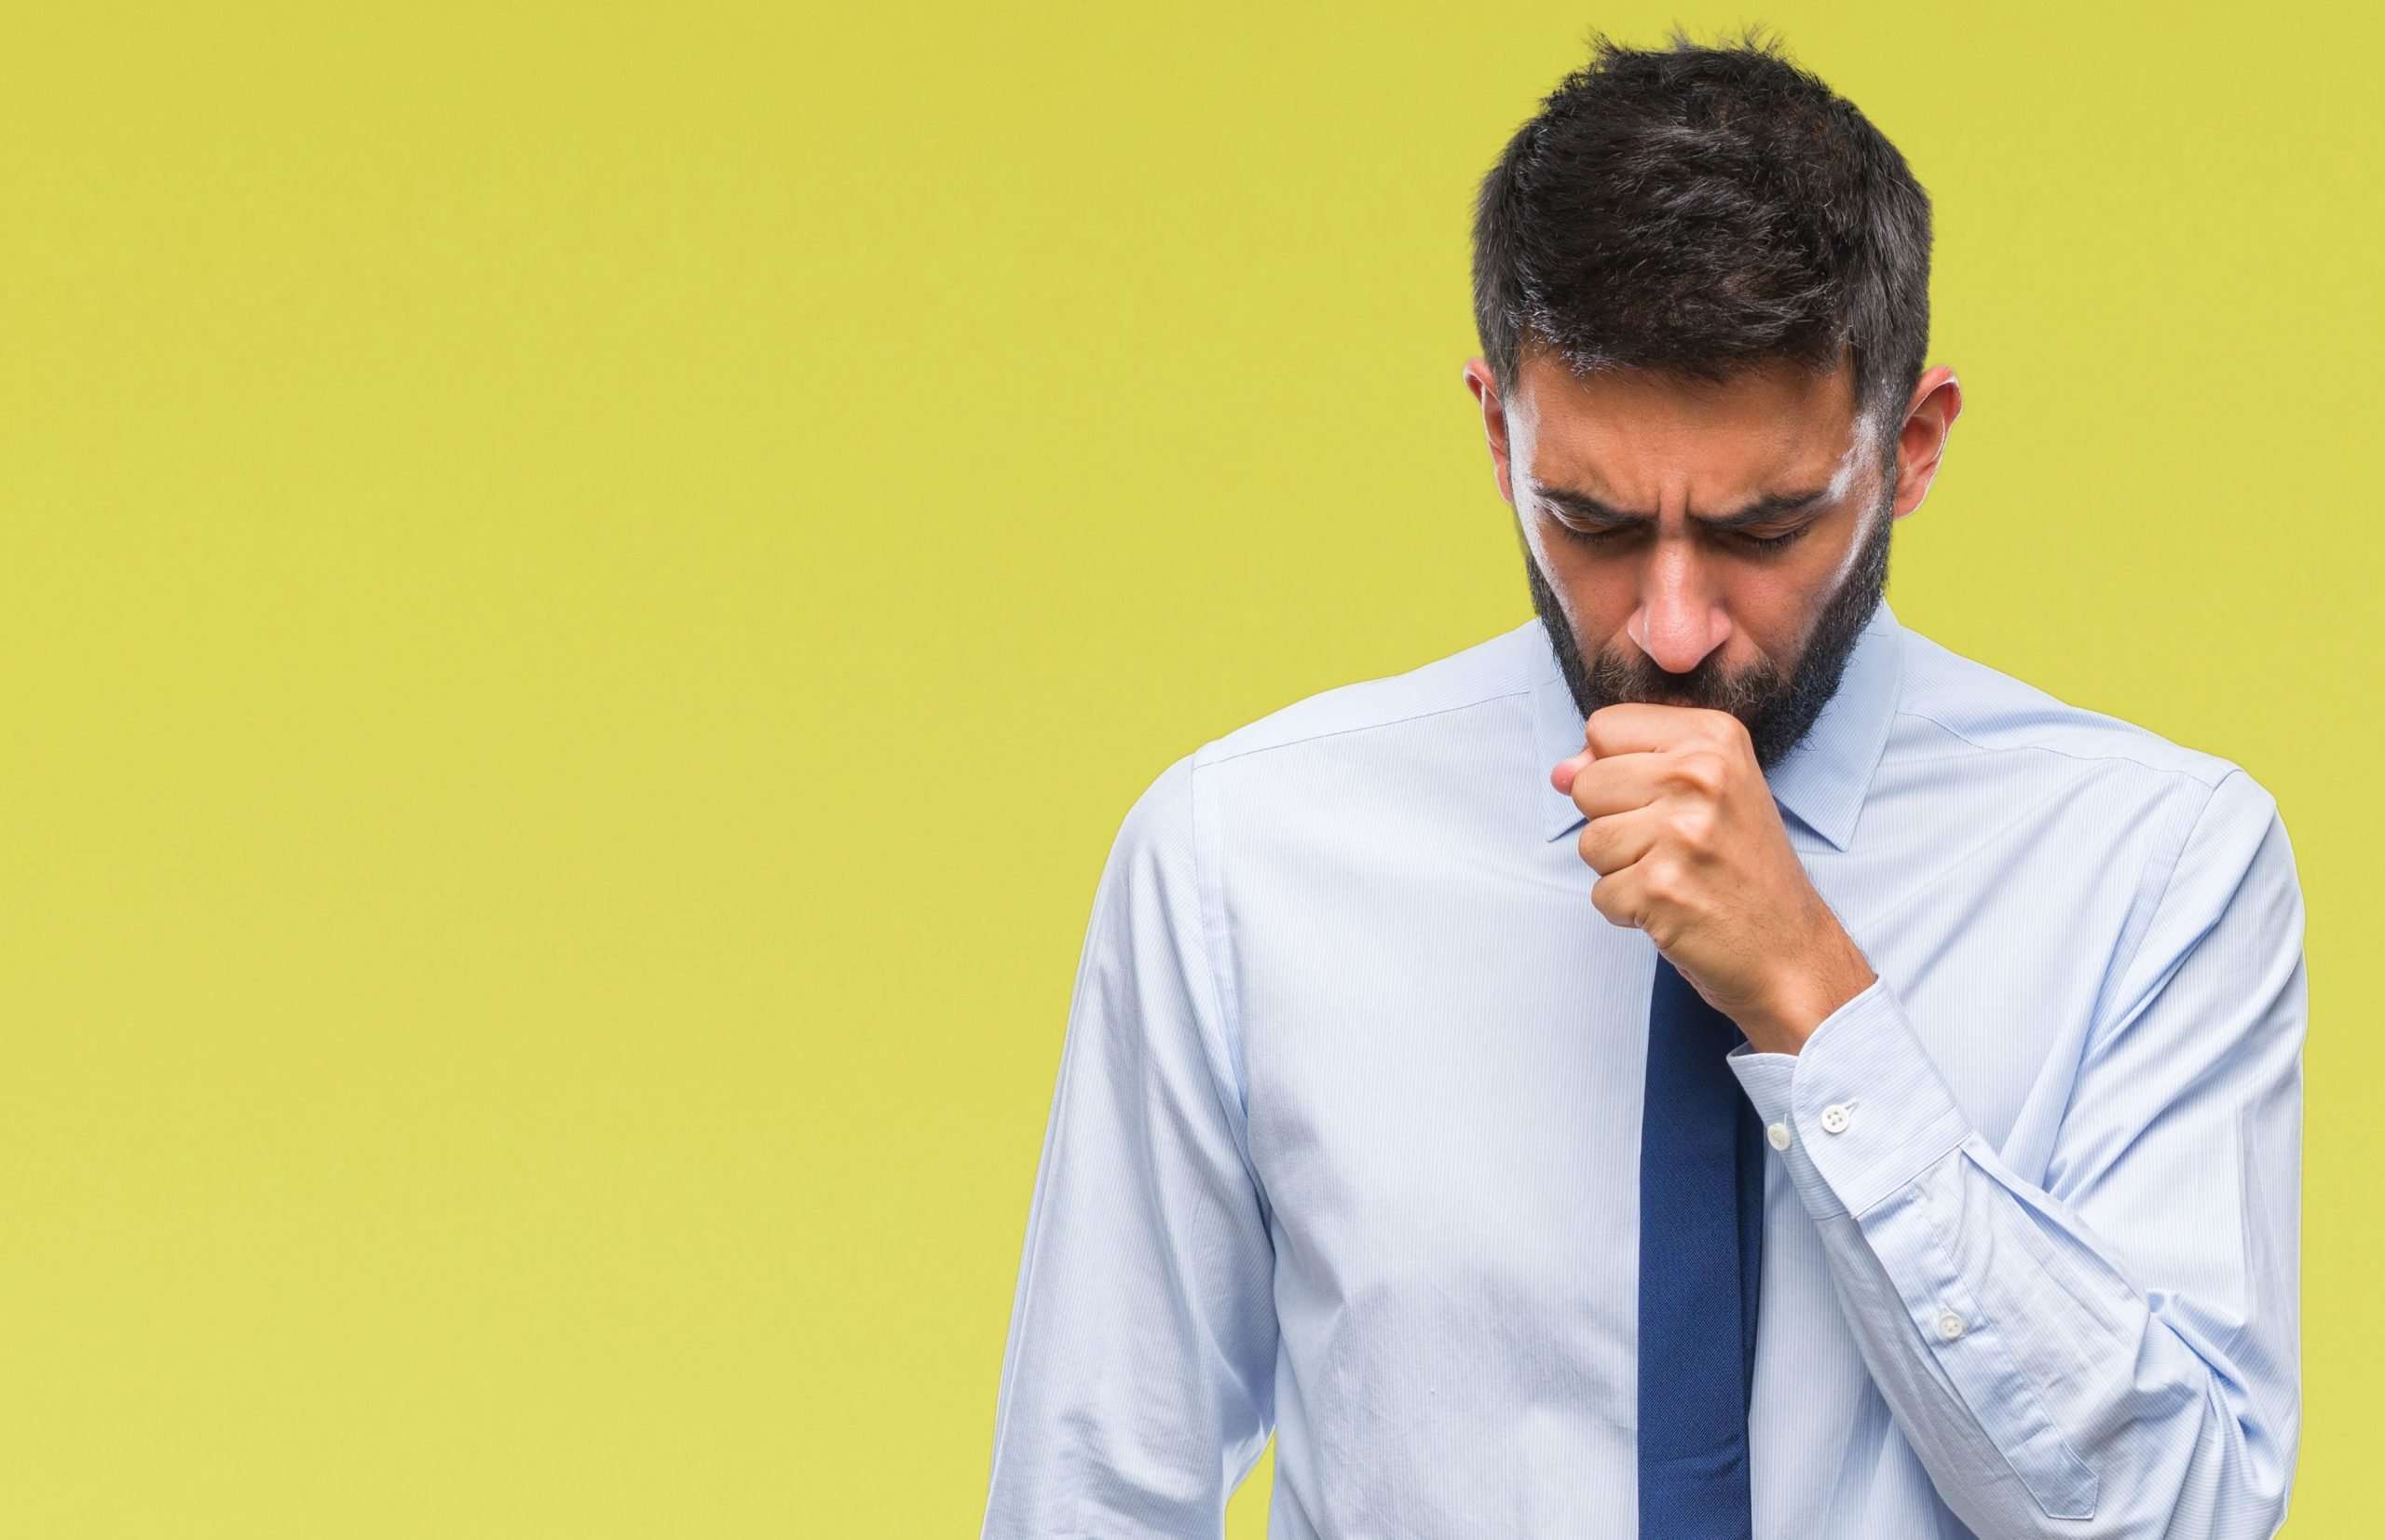 How To Get Rid Of Dry Cough At Home